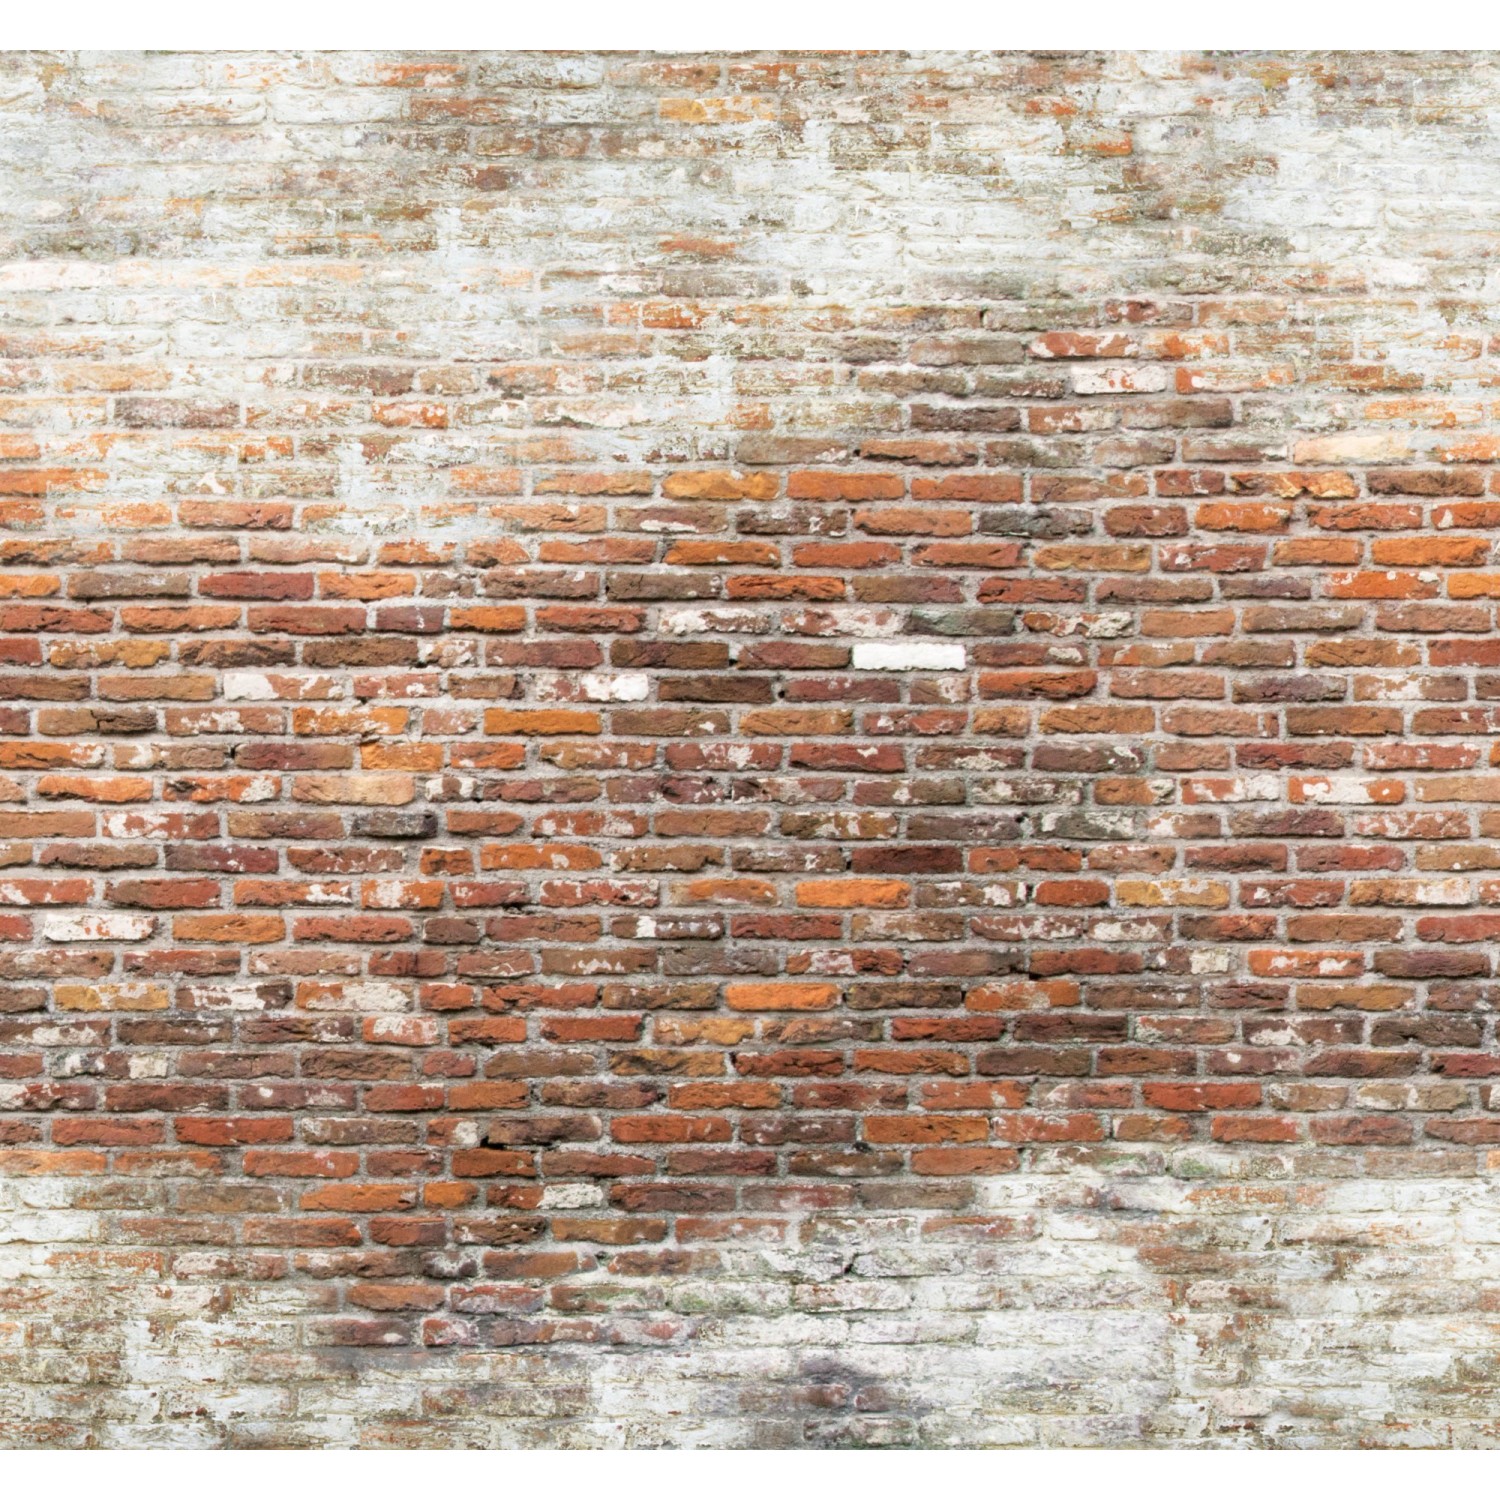 Art for the Home Fototapete Brick wall 2 280 x 300 cm von Art for the Home